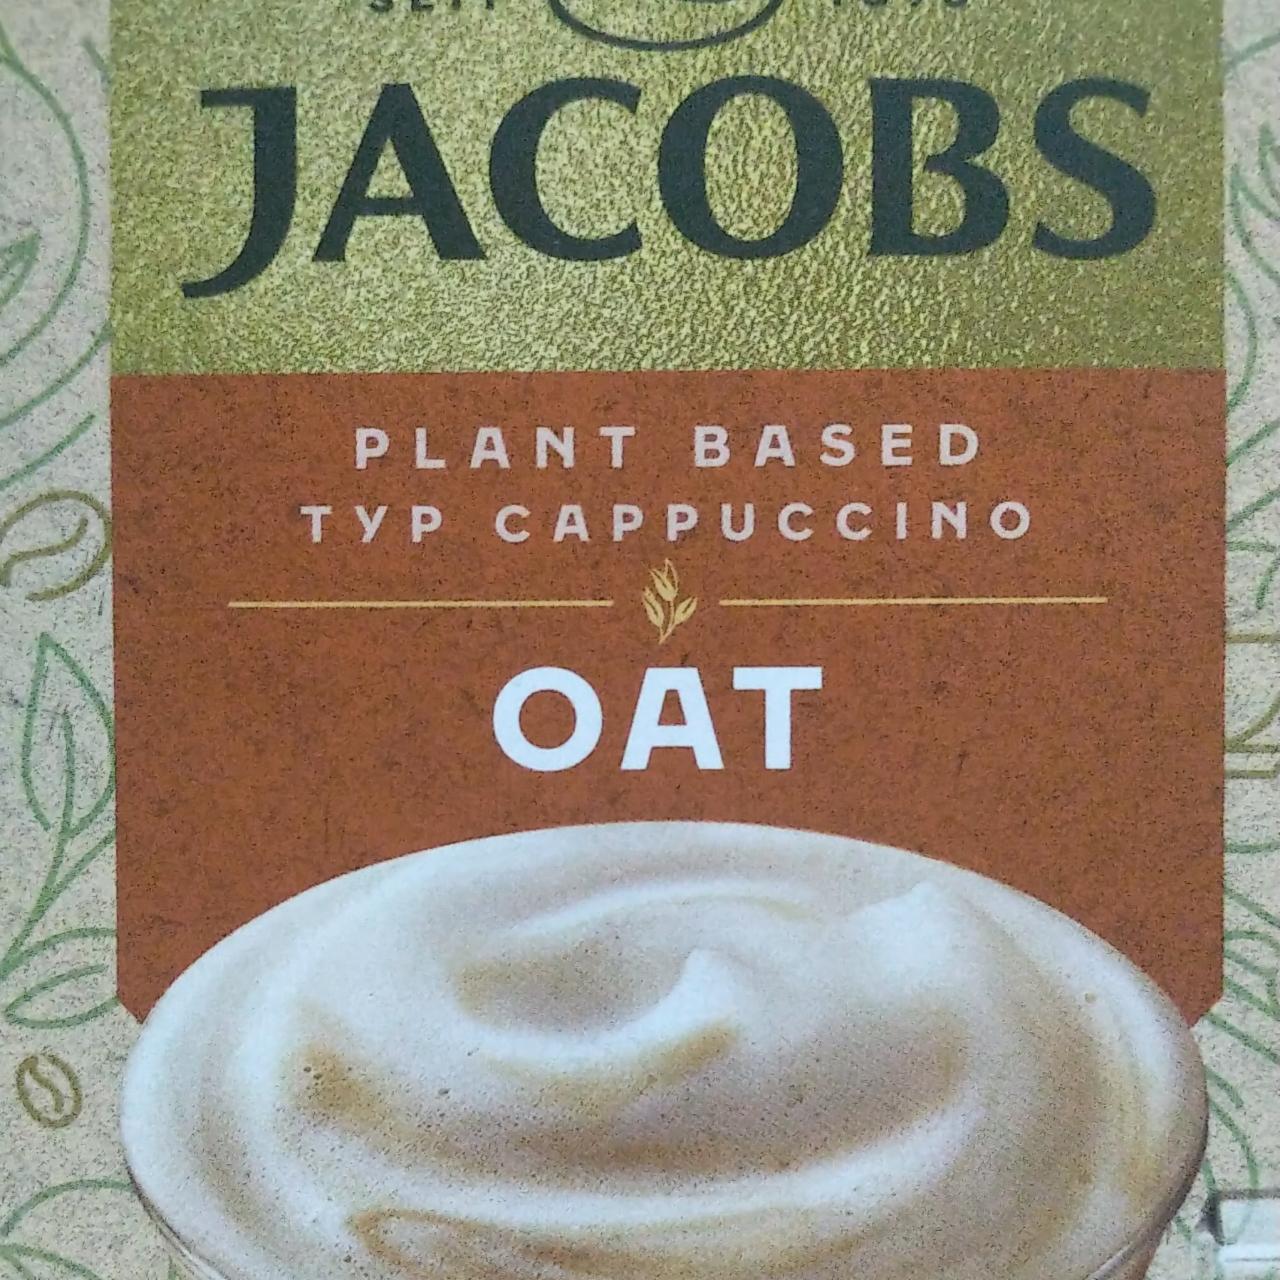 Fotografie - Plant based typ Cappuccino Oat Jacobs